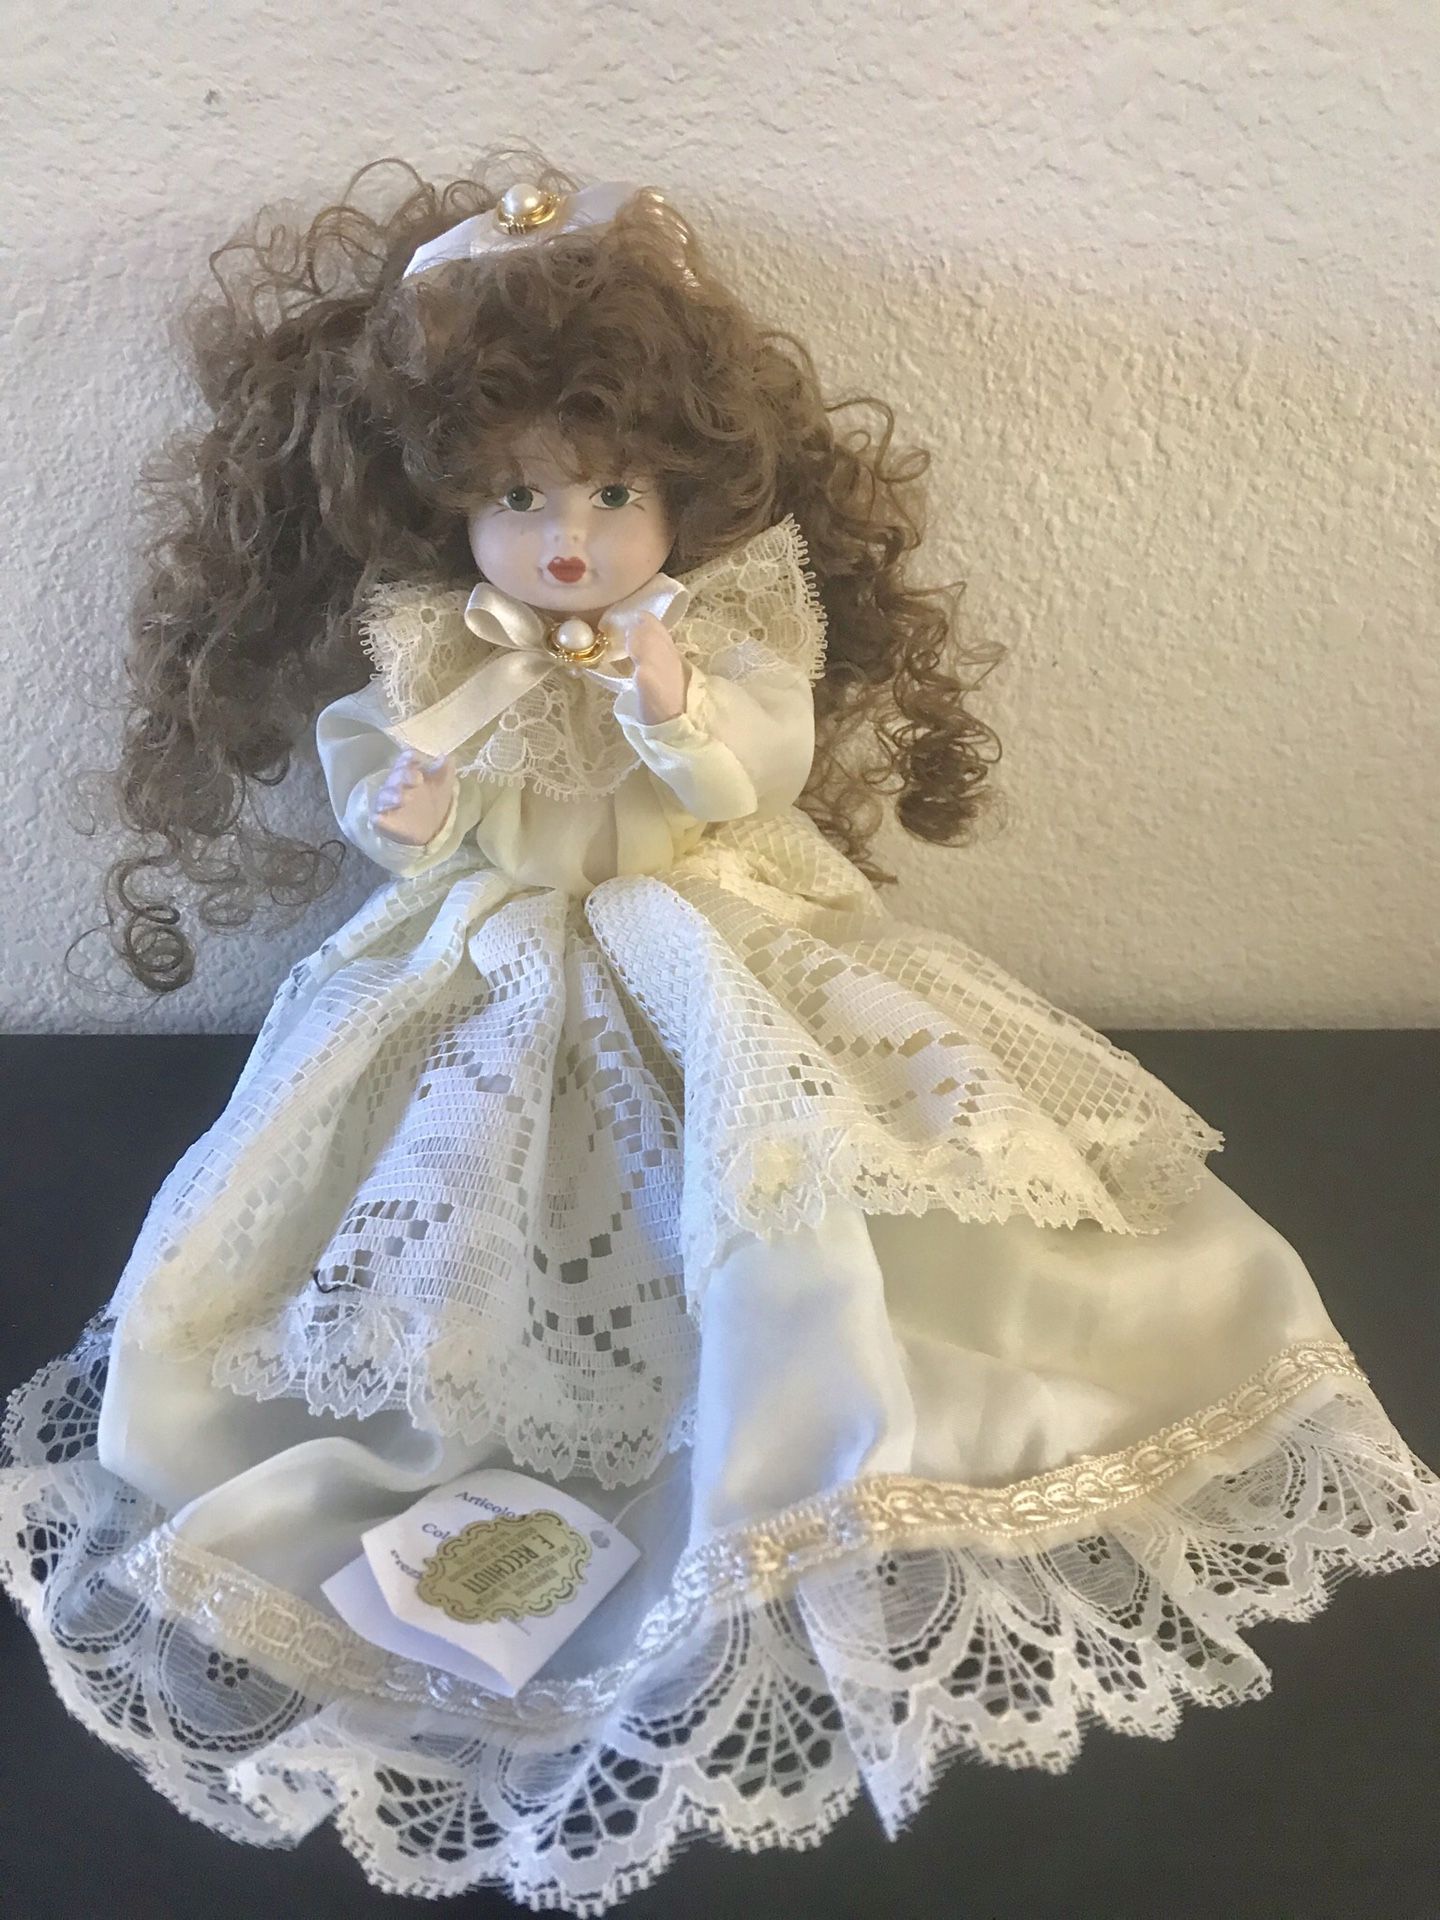 Porcelain hand painted doll from Italy